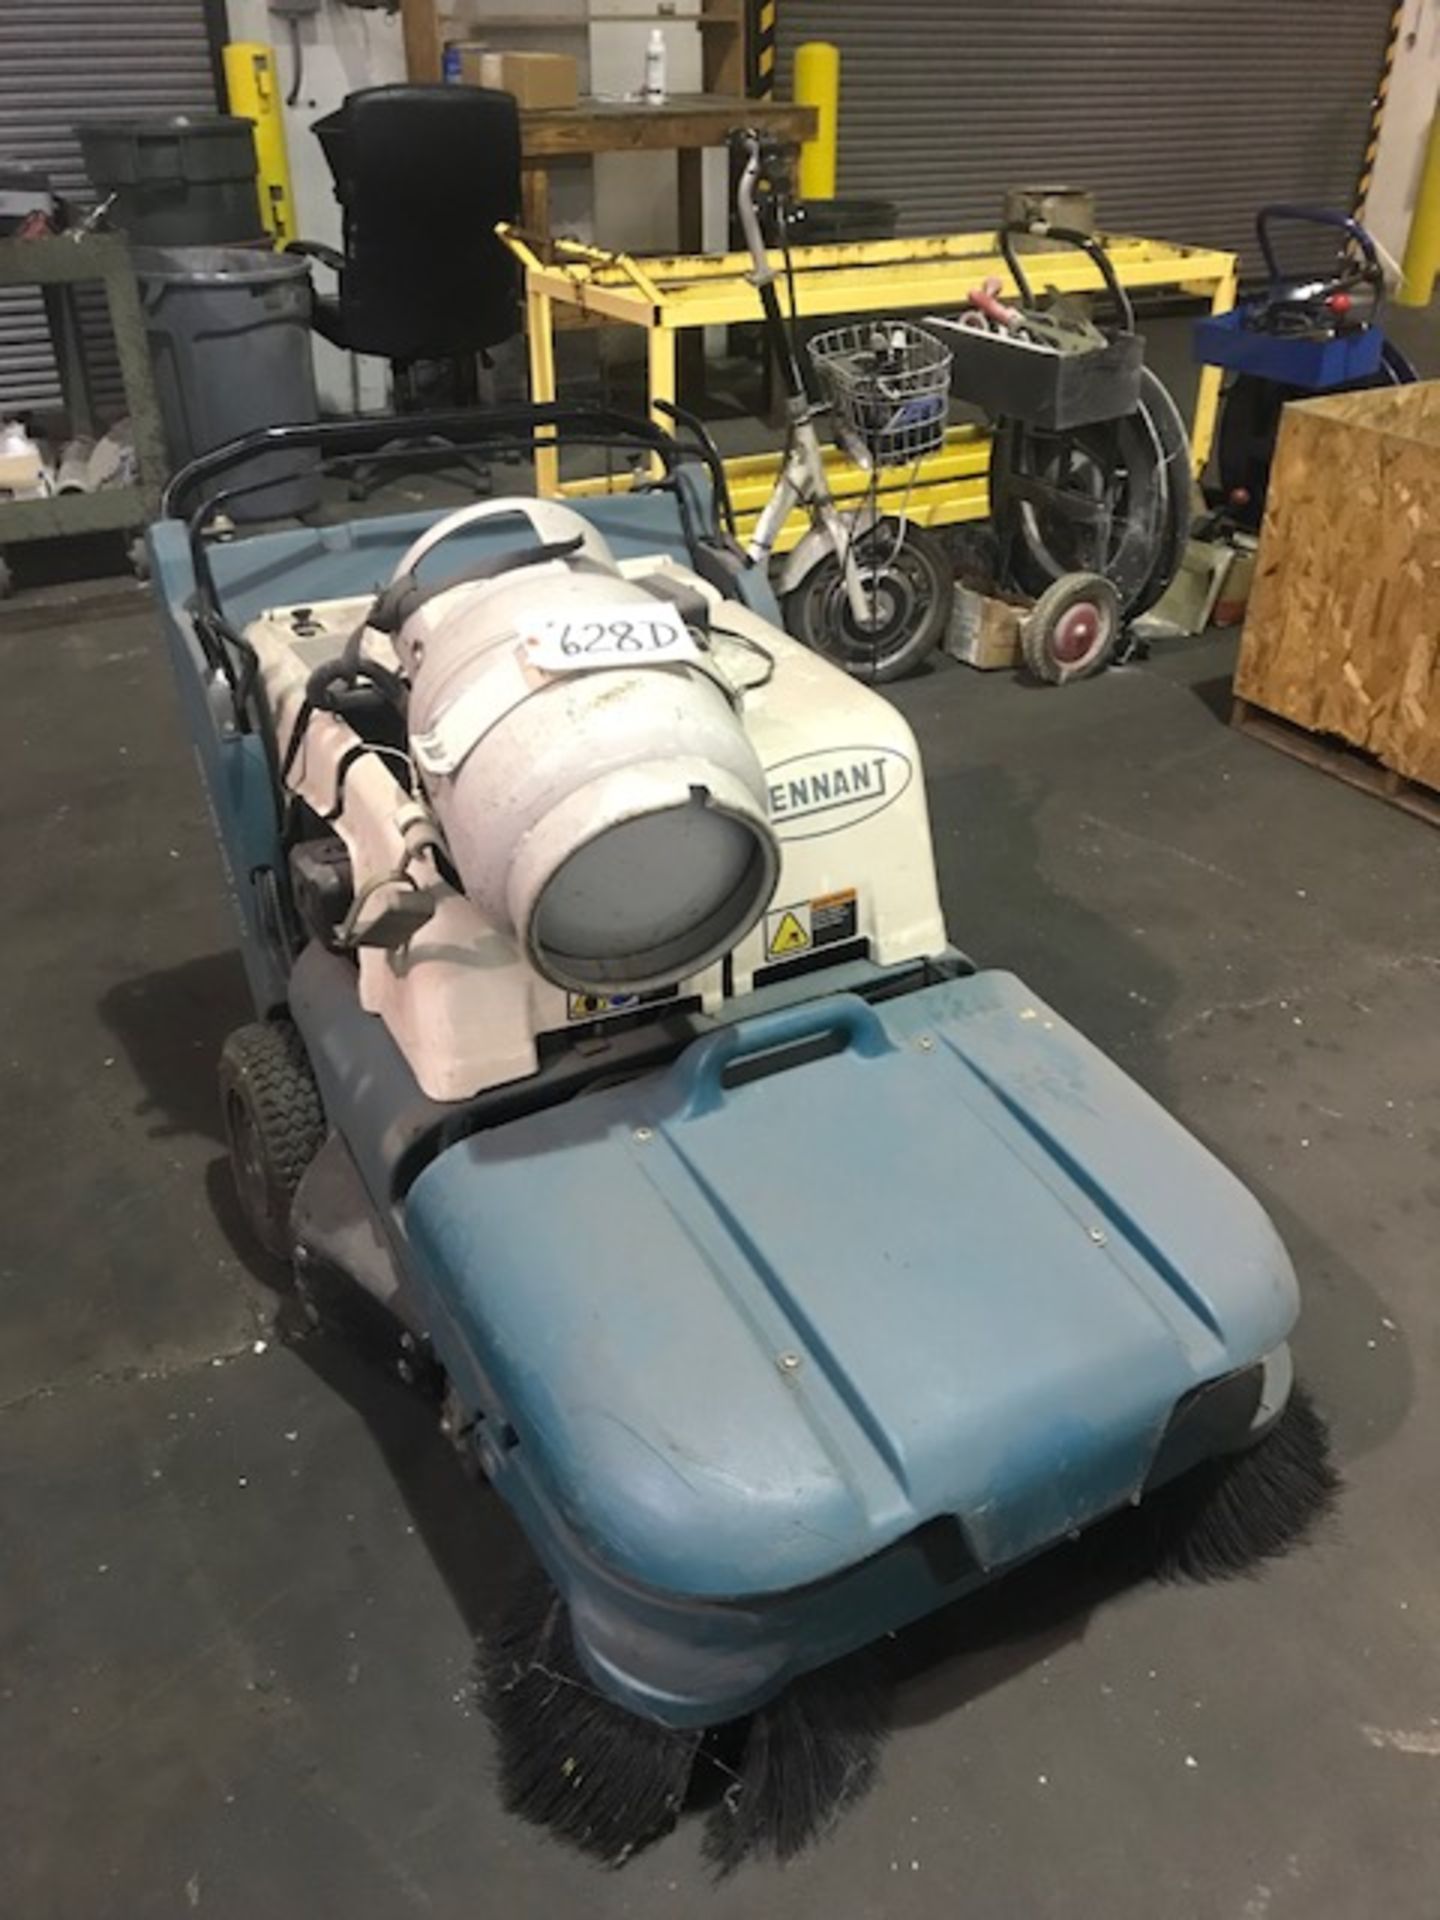 Tenant Model 3640 Floor Scrubber with Propane, Battery Charger,  Approx 480 hours